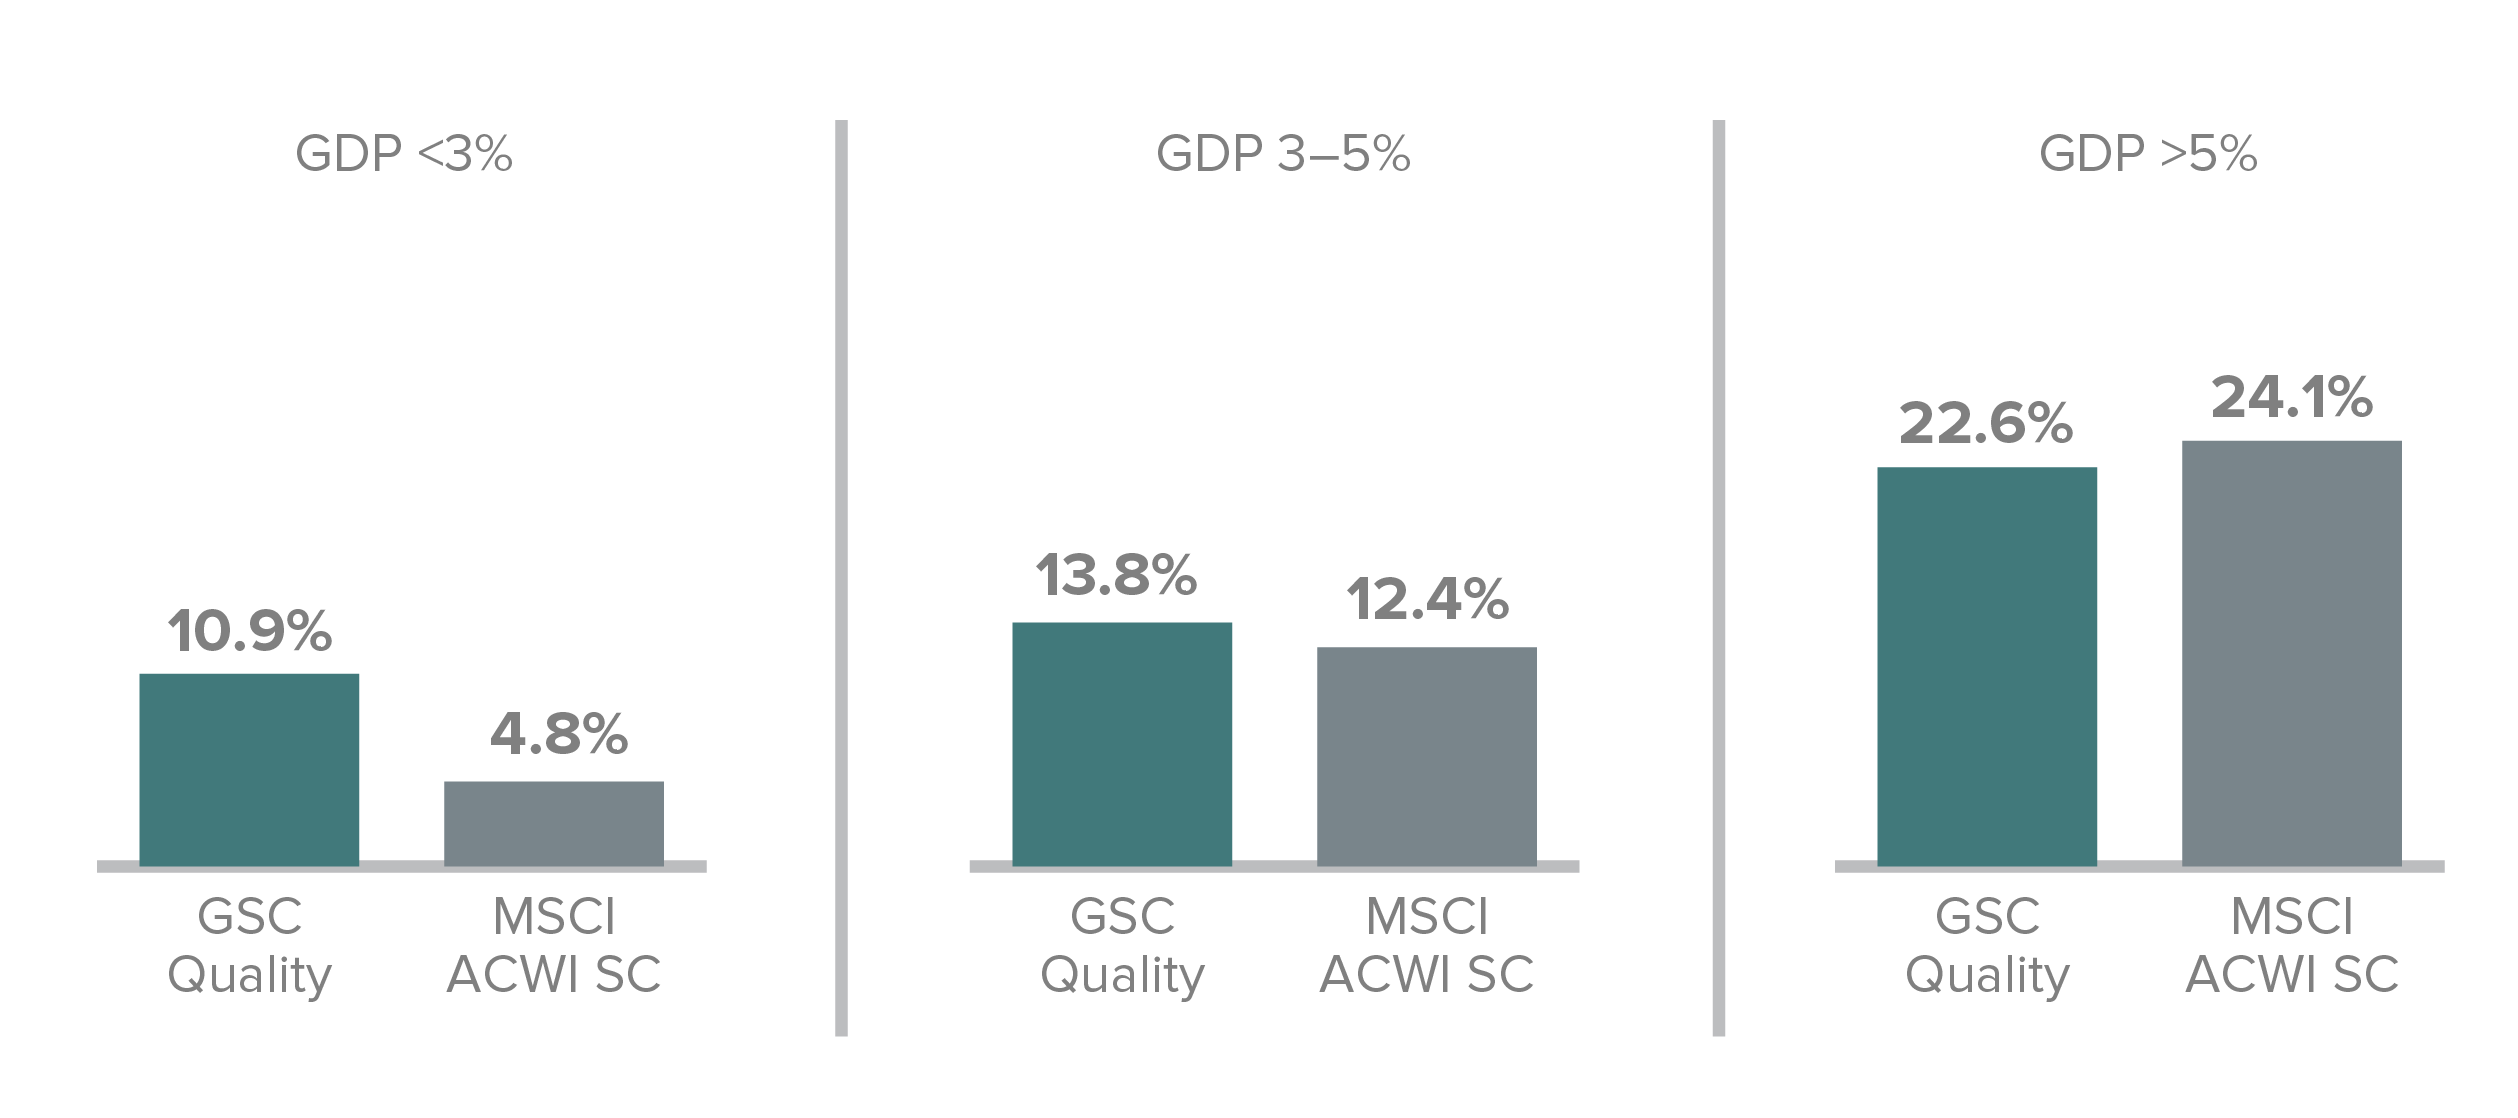 GDP < 3% is 10.9% for GSC Quality and 4.8% for MSCI ACWI SC. GDP 3-5% is 13.8% for QSC Quality and 12.4% for MSCI ACWI SC. GDP > 5% is GSC Quality and 24.1% for MSCI ACWI SC